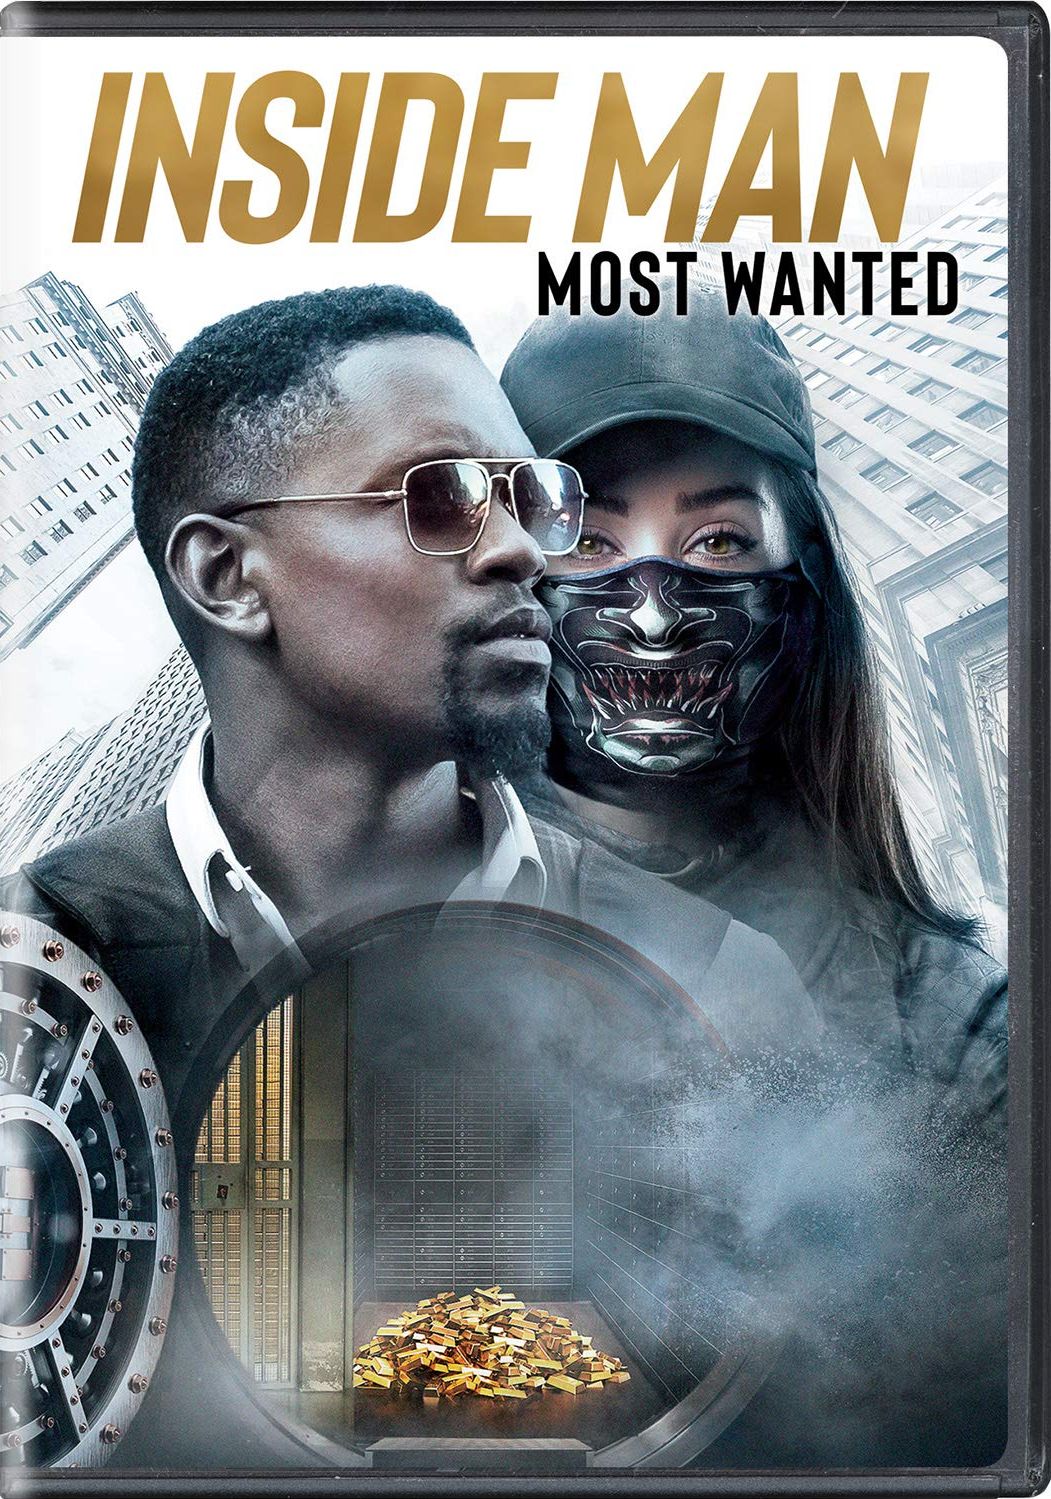 Inside Man: Most Wanted DVD Release Date September 24, 2019